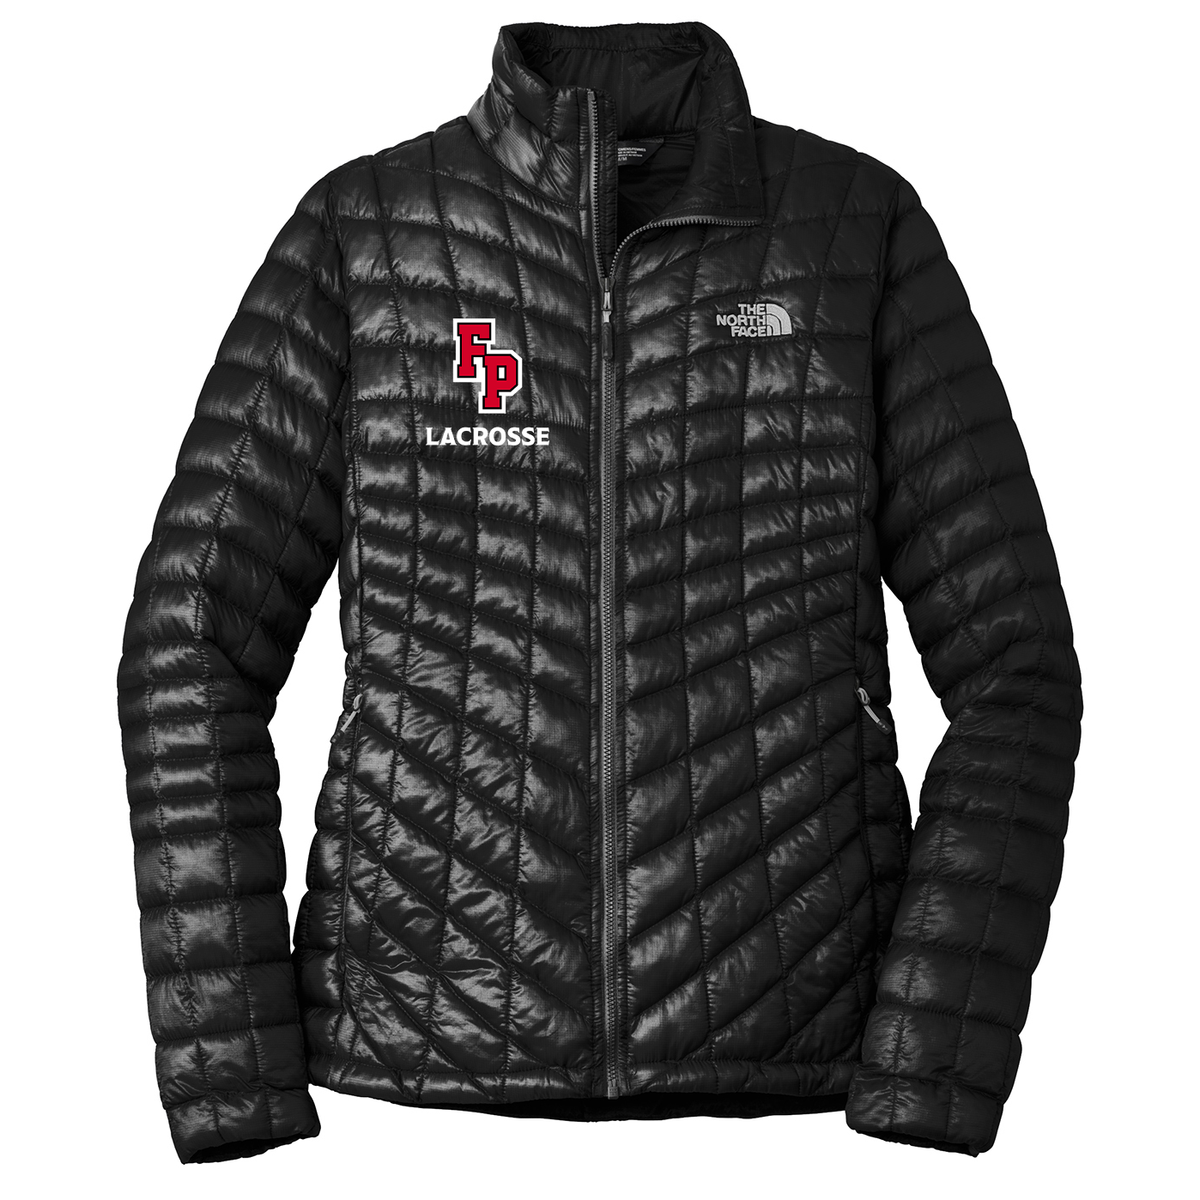 Floral Park Lacrosse The North Face Ladies ThermoBall Jacket